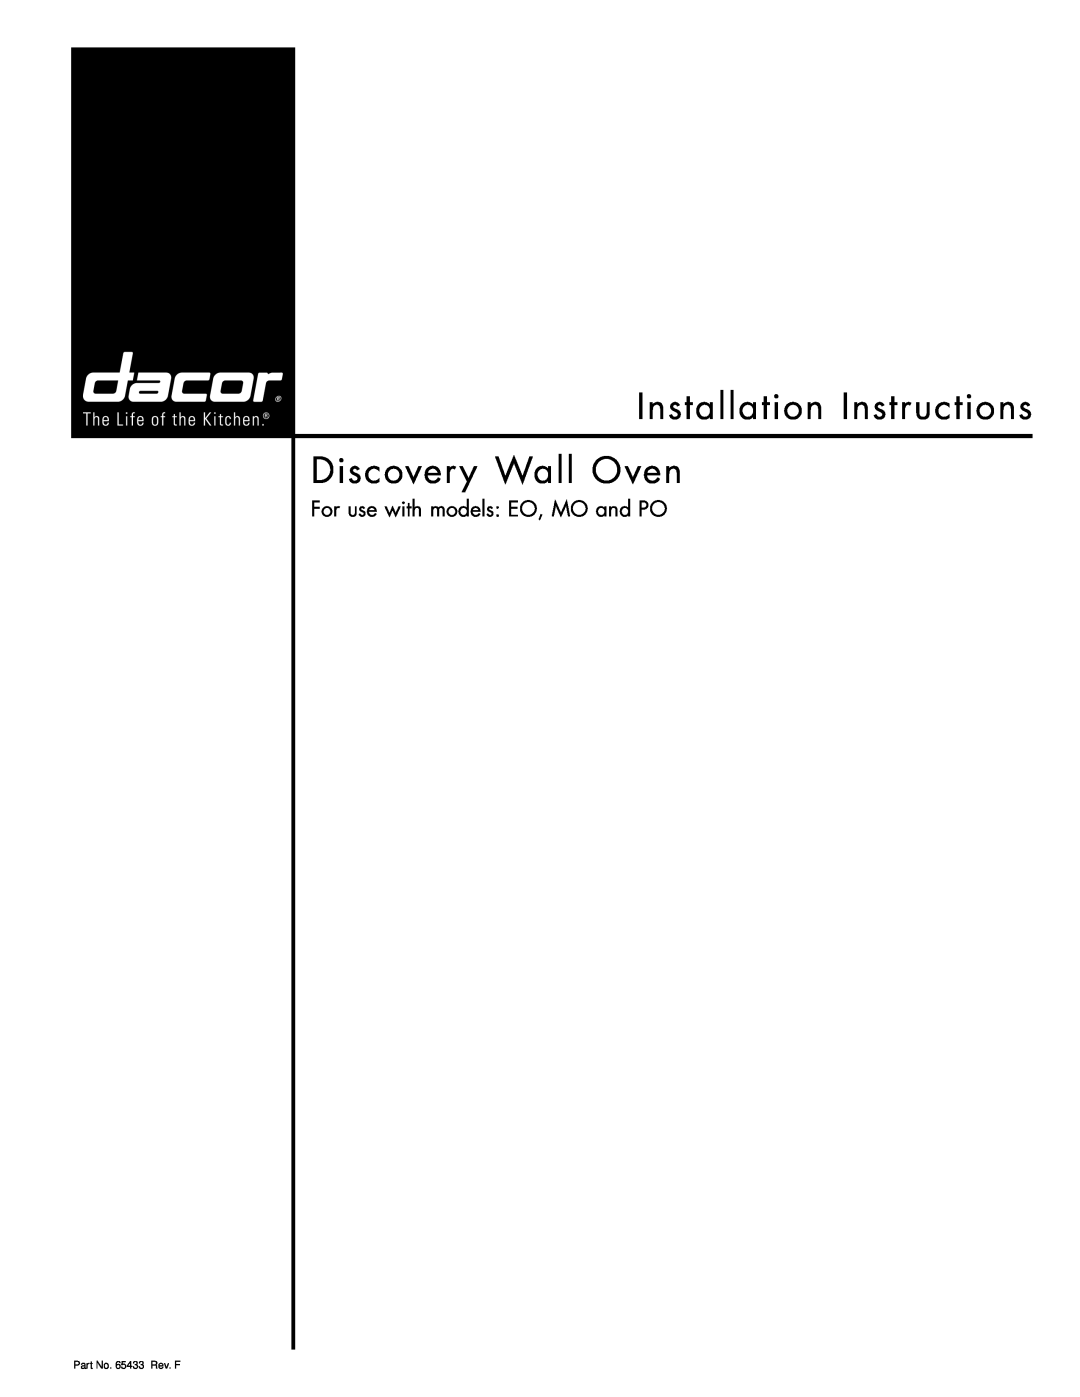 Dacor MOH230 installation instructions For use with models EO, MO and PO, Installation Instructions Discovery Wall Oven 